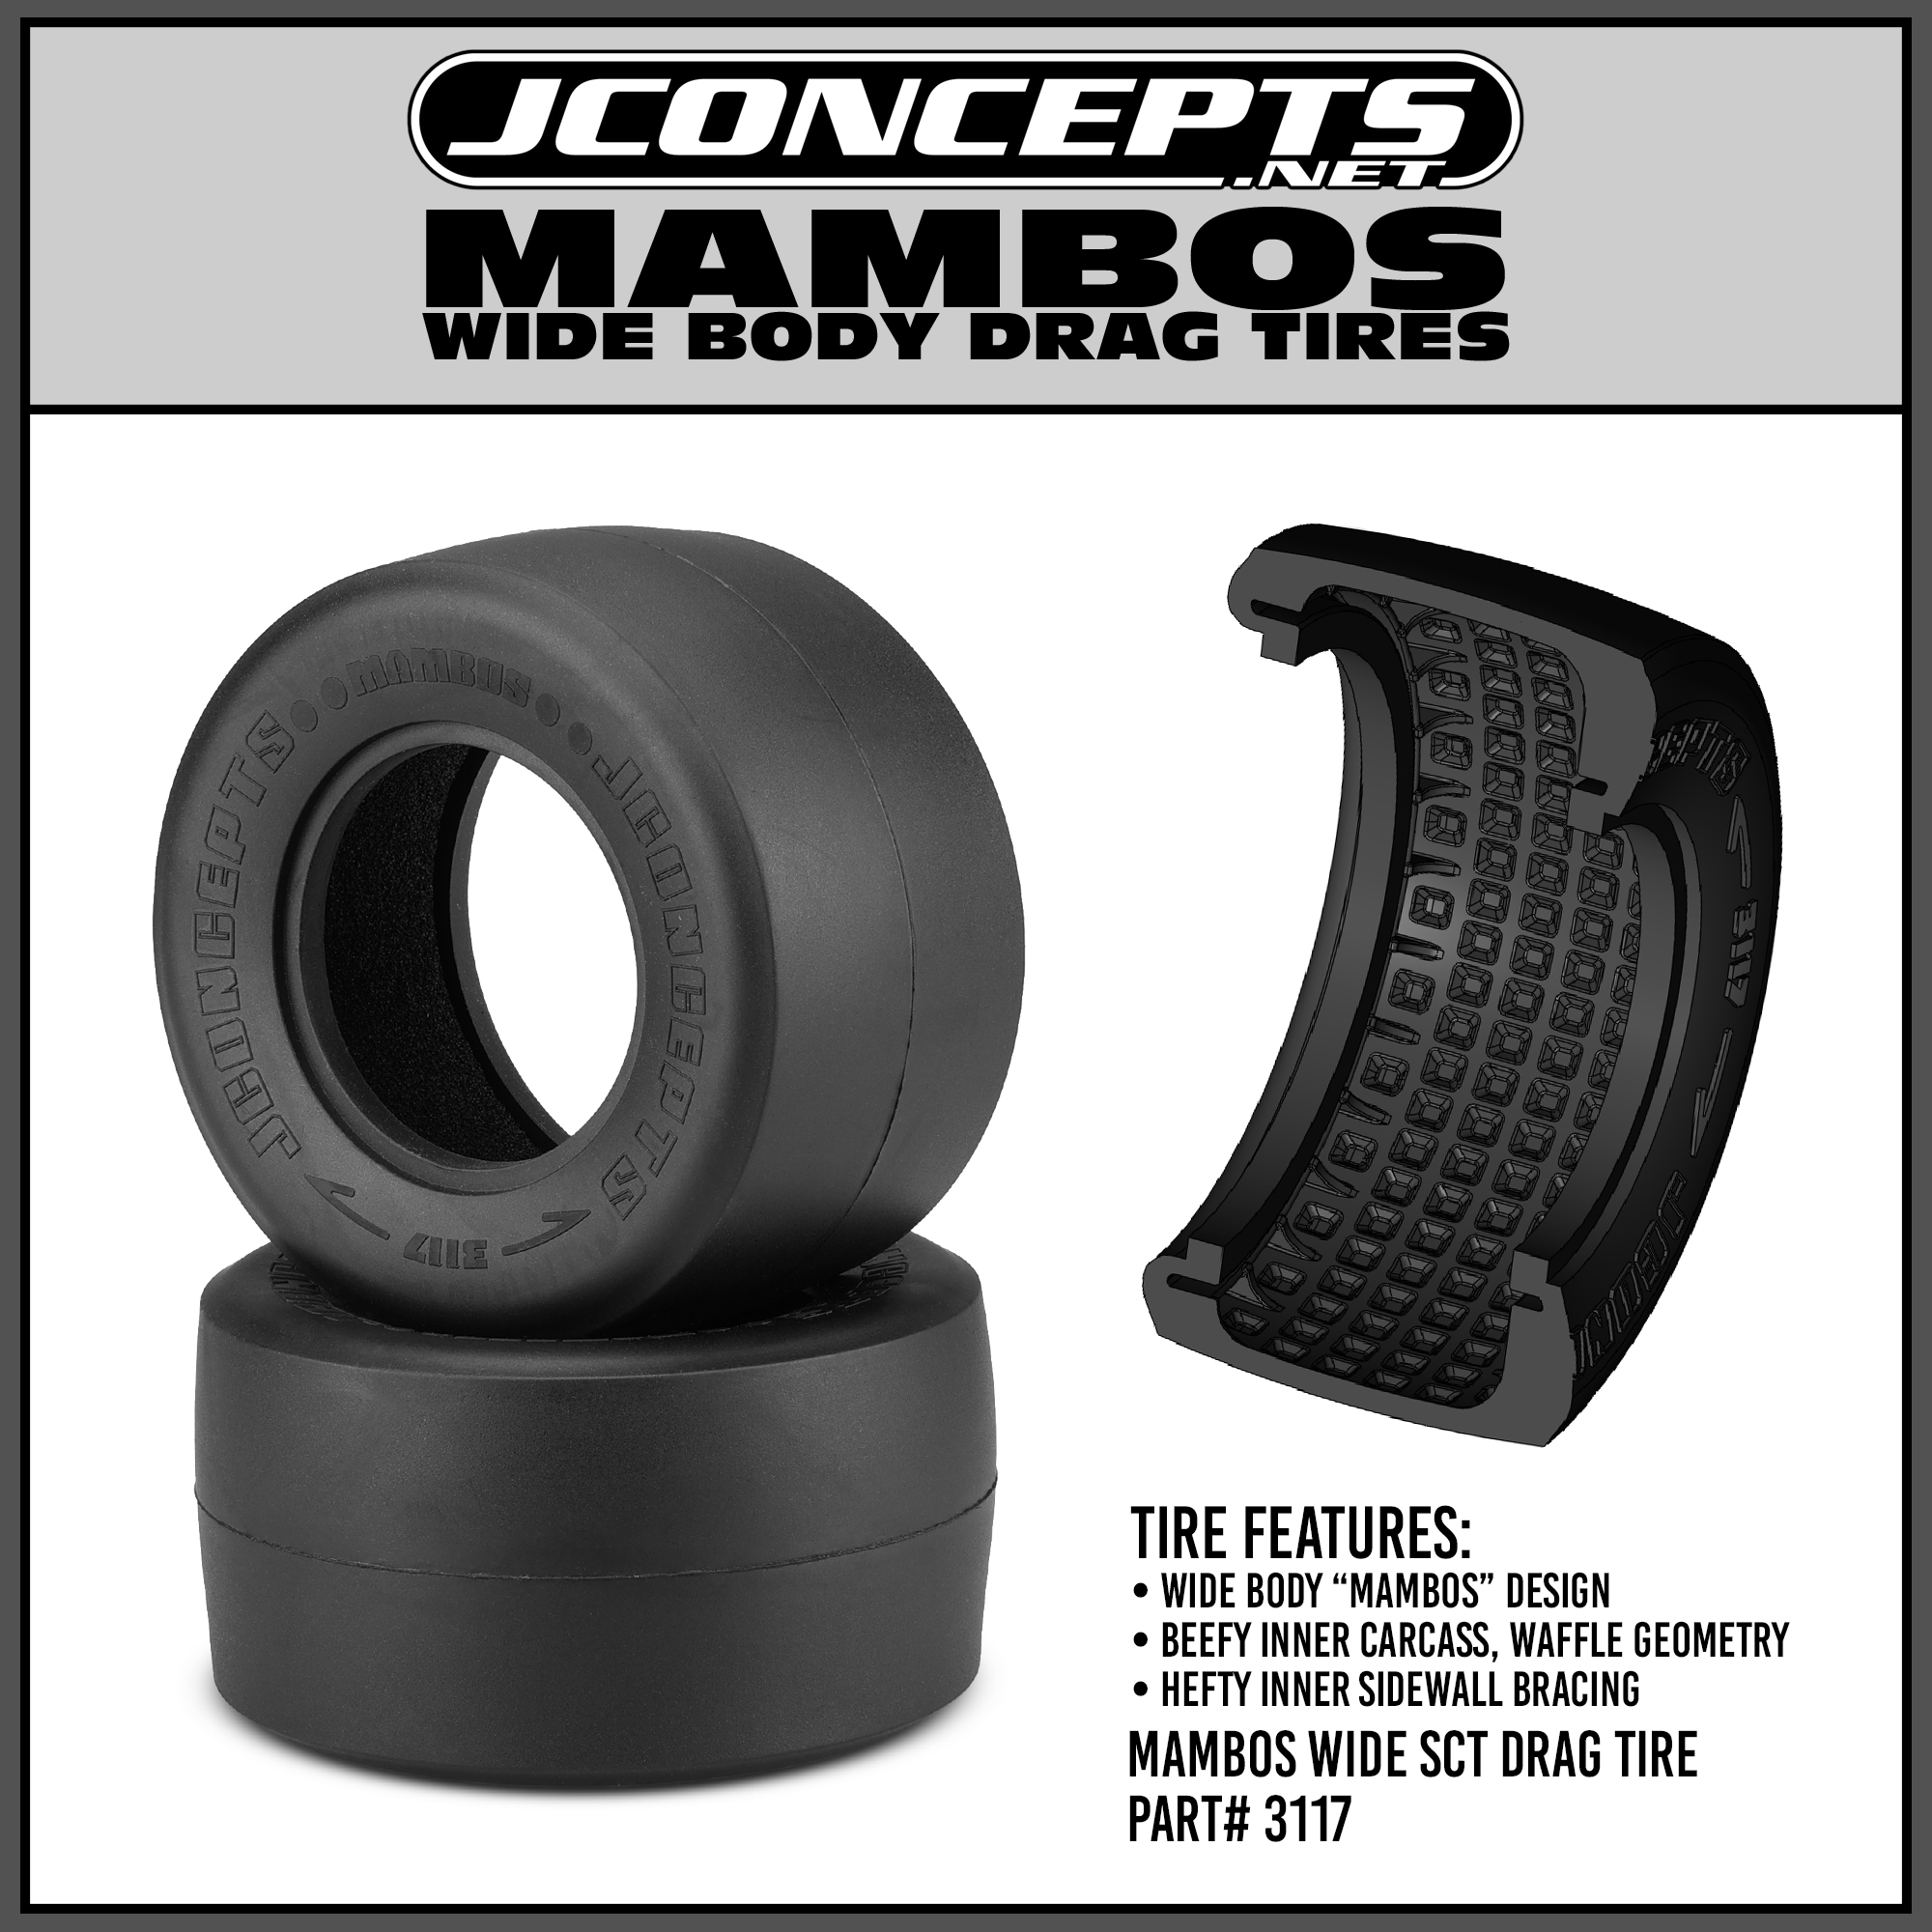 JConcepts Mambos Drag Racing Rear Tire Now Available In Green And Gold Compounds